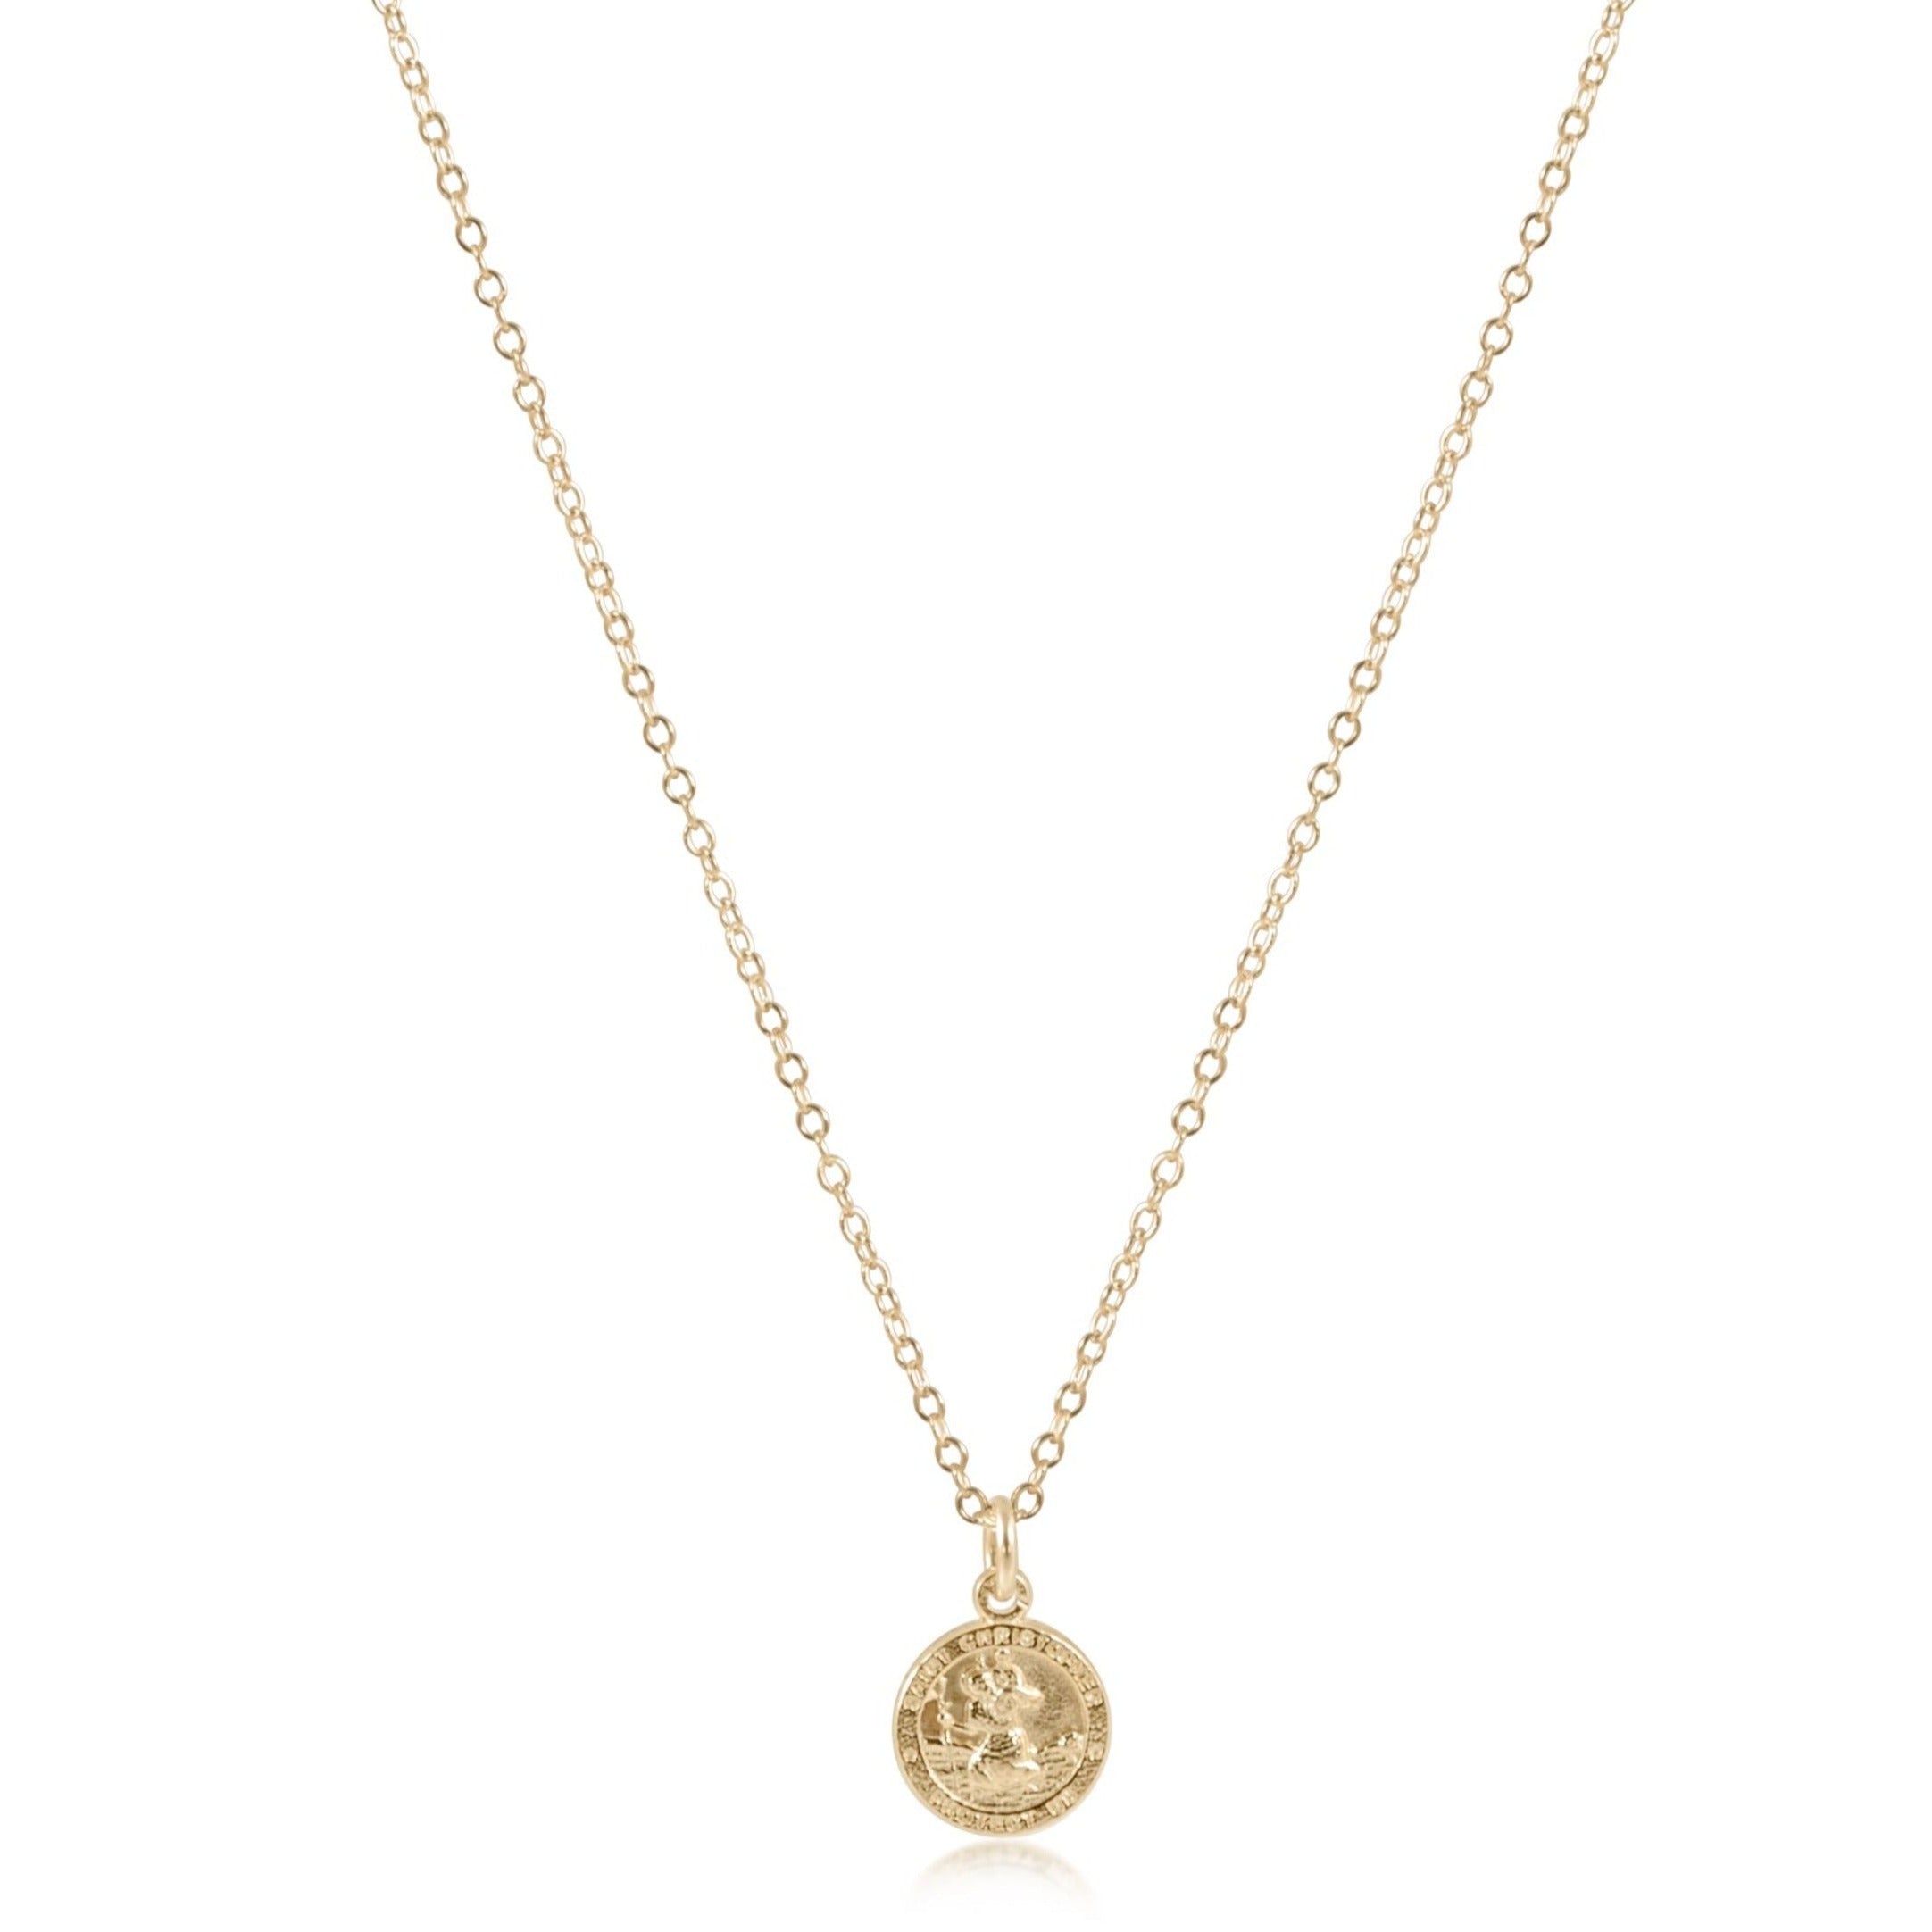 16" Necklace Gold - Protection Small Gold Disc